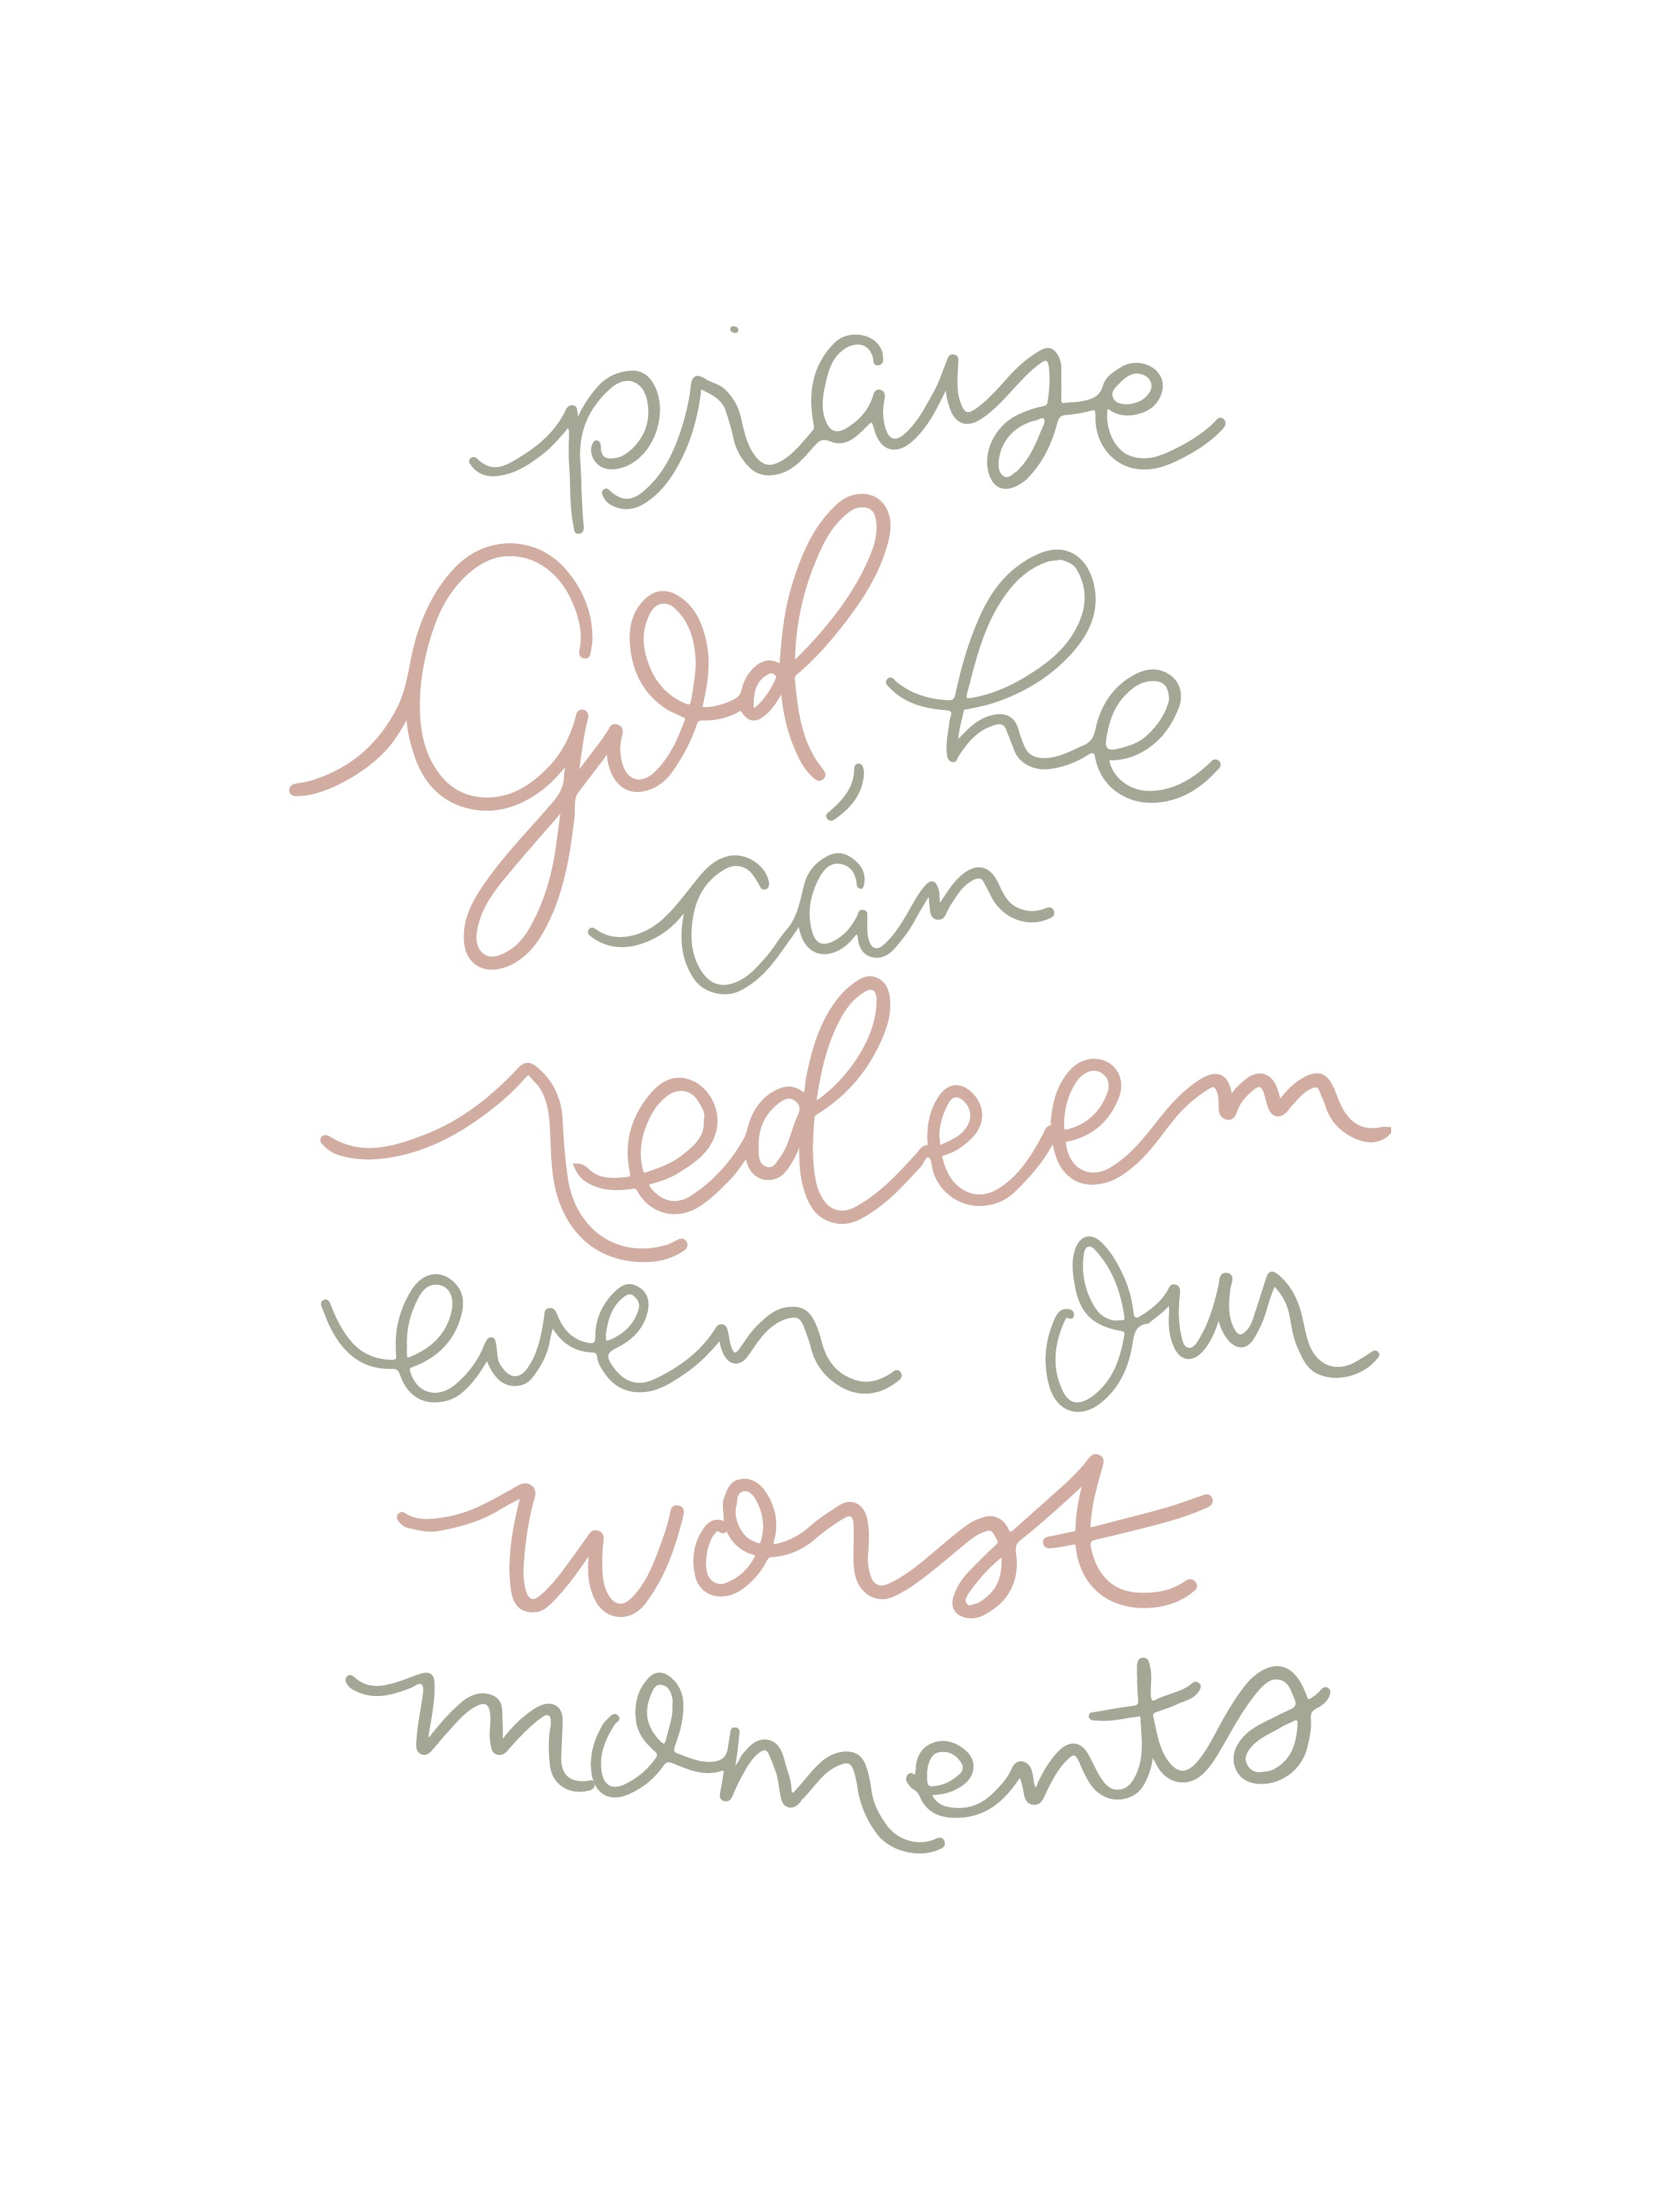 Praise God, He can redeem our worst moments | TDGC